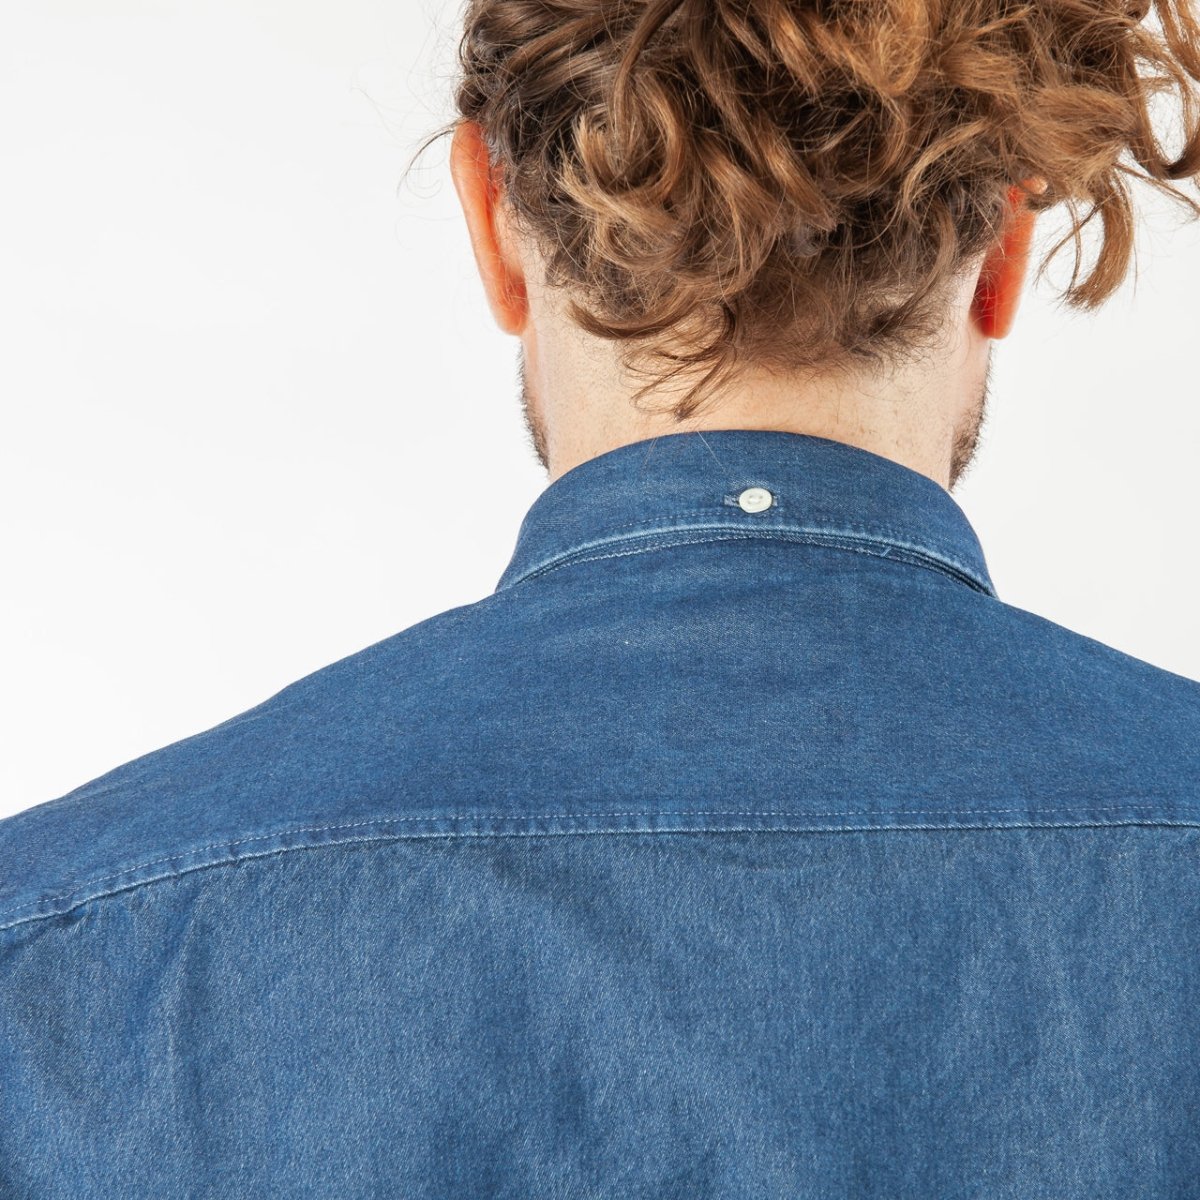 Norse Projects Anton Denim (Sunwashed)  - Allike Store